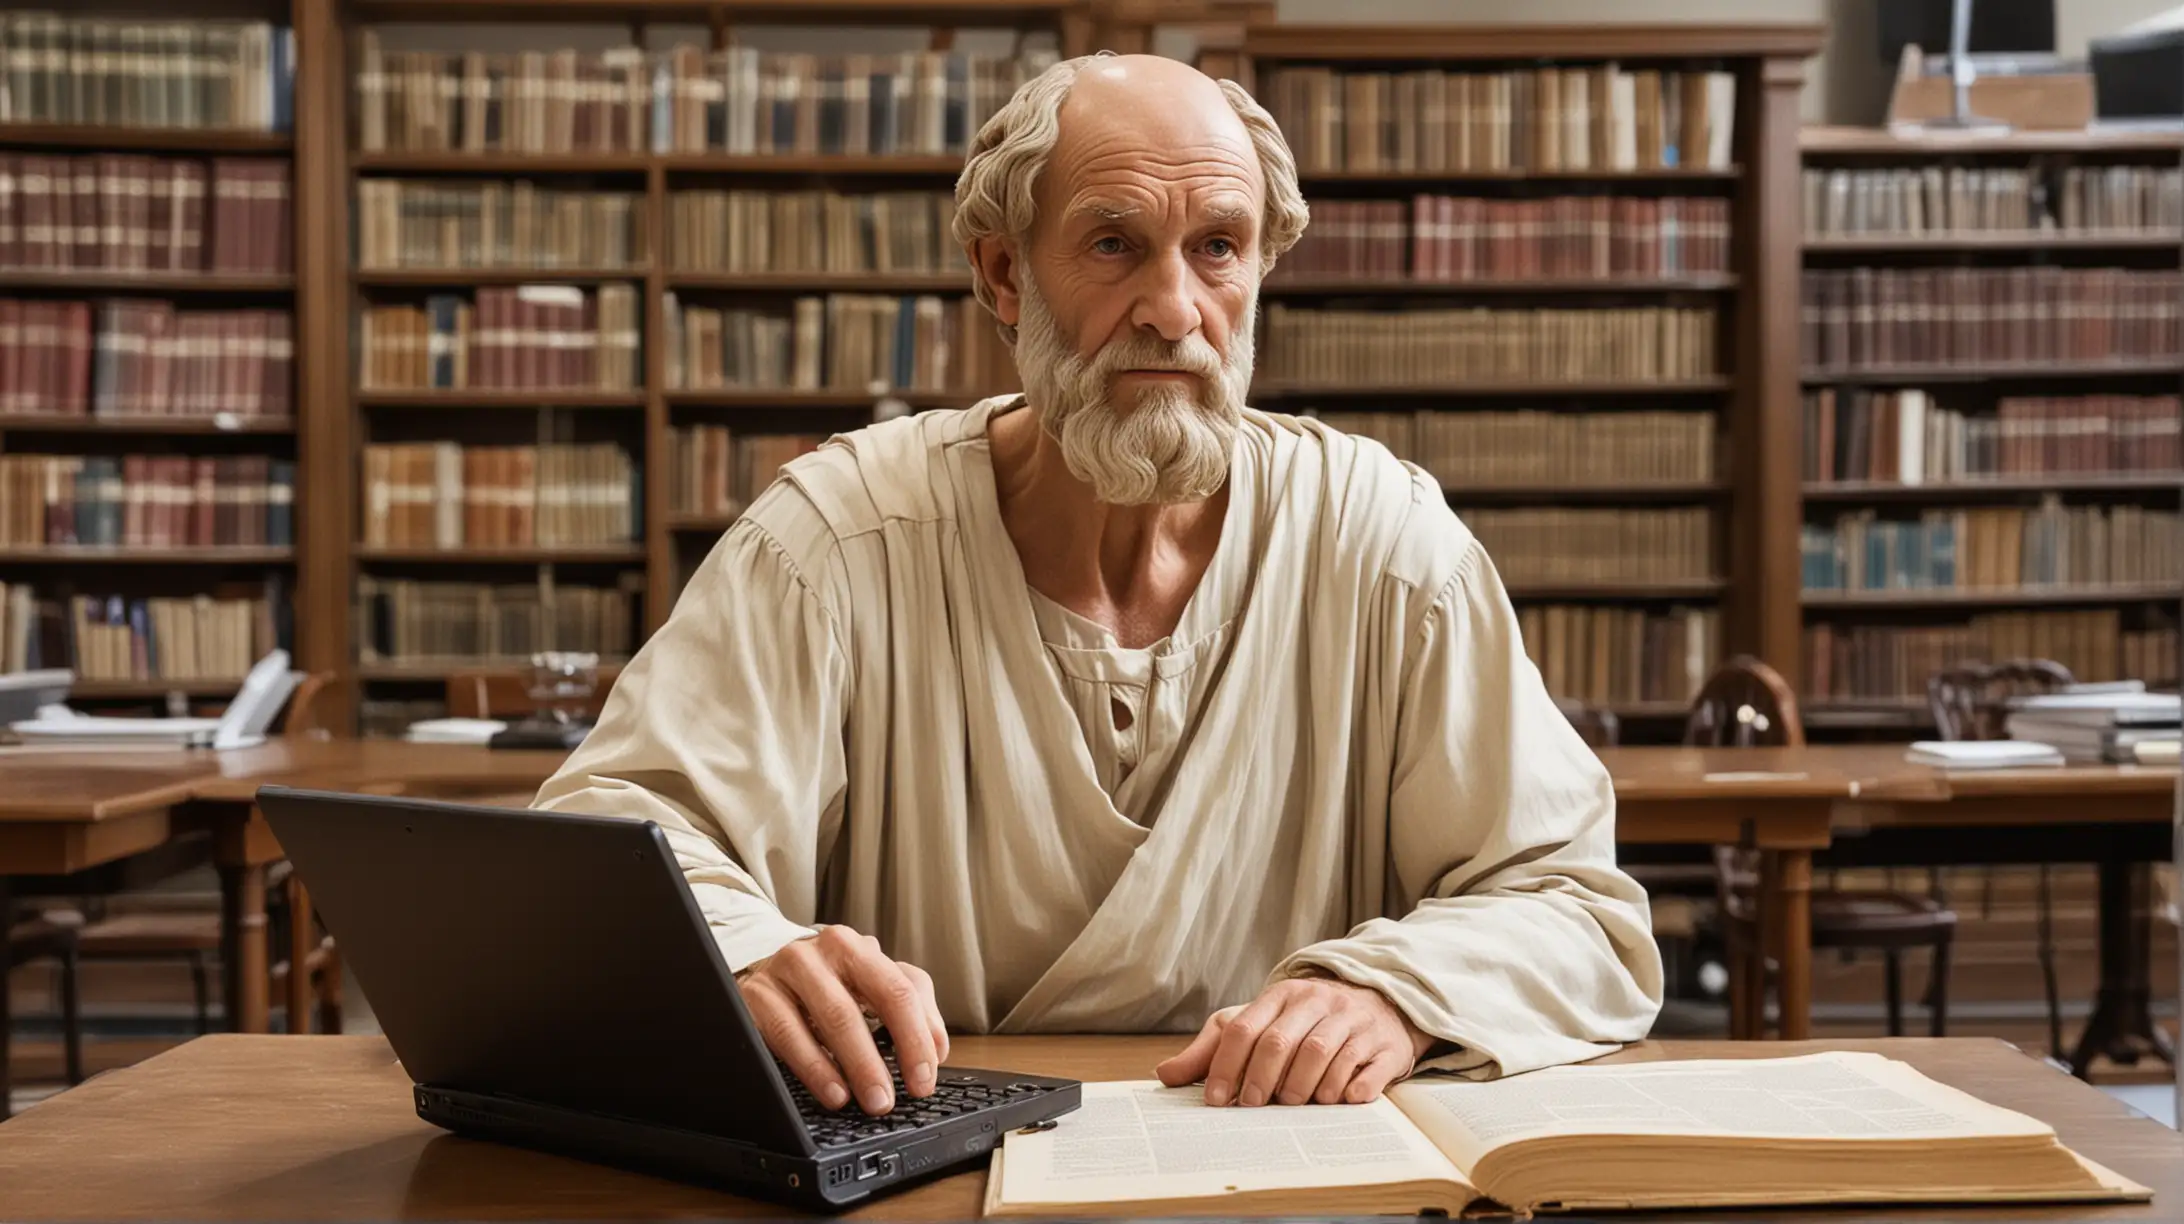 Hippocrates Studying with Computer in University Library